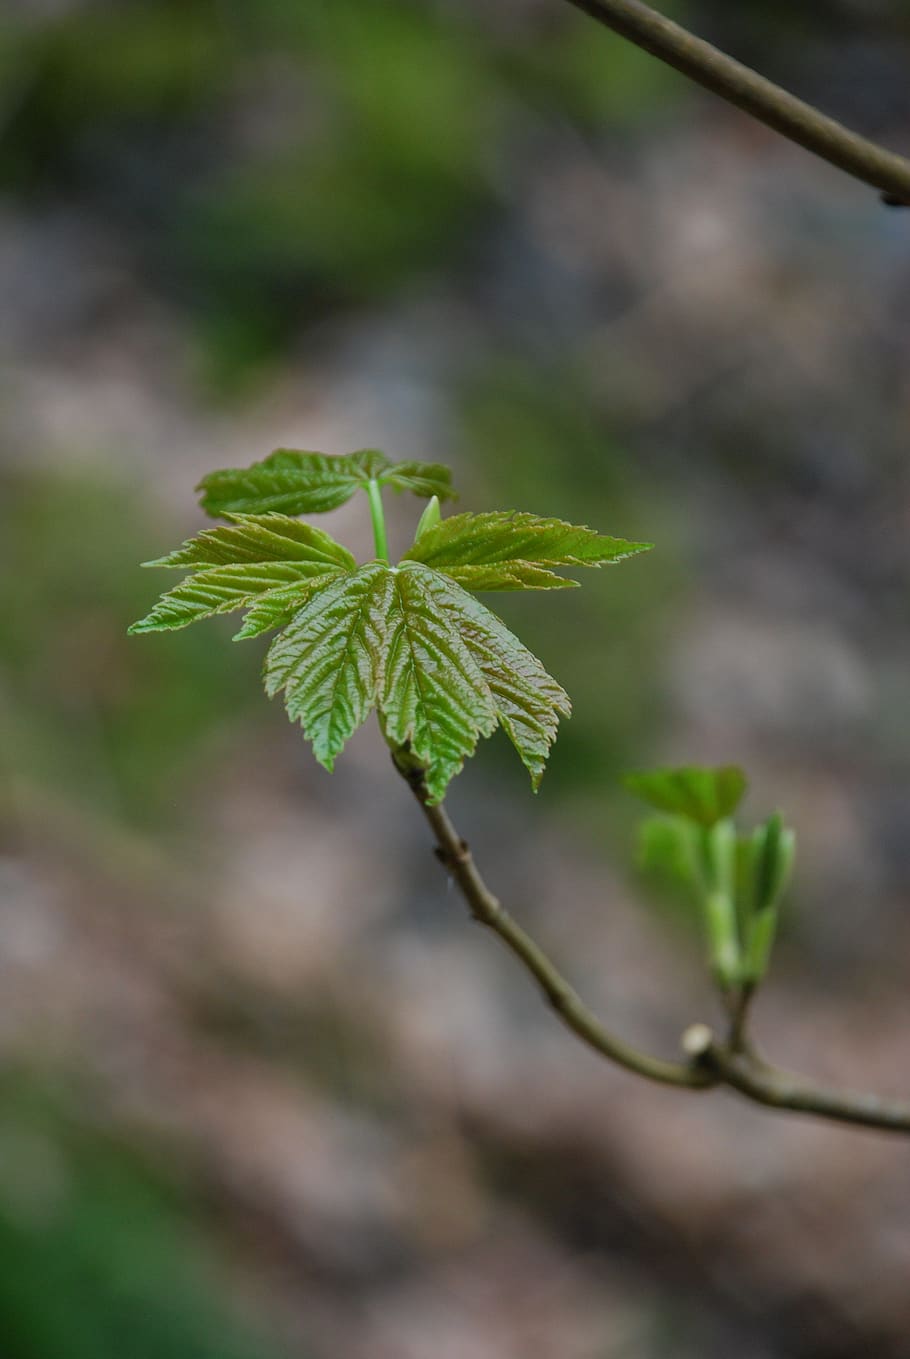 sycamore, sapling, bud, woodland, leaf, plant part, plant, growth, green color, close-up